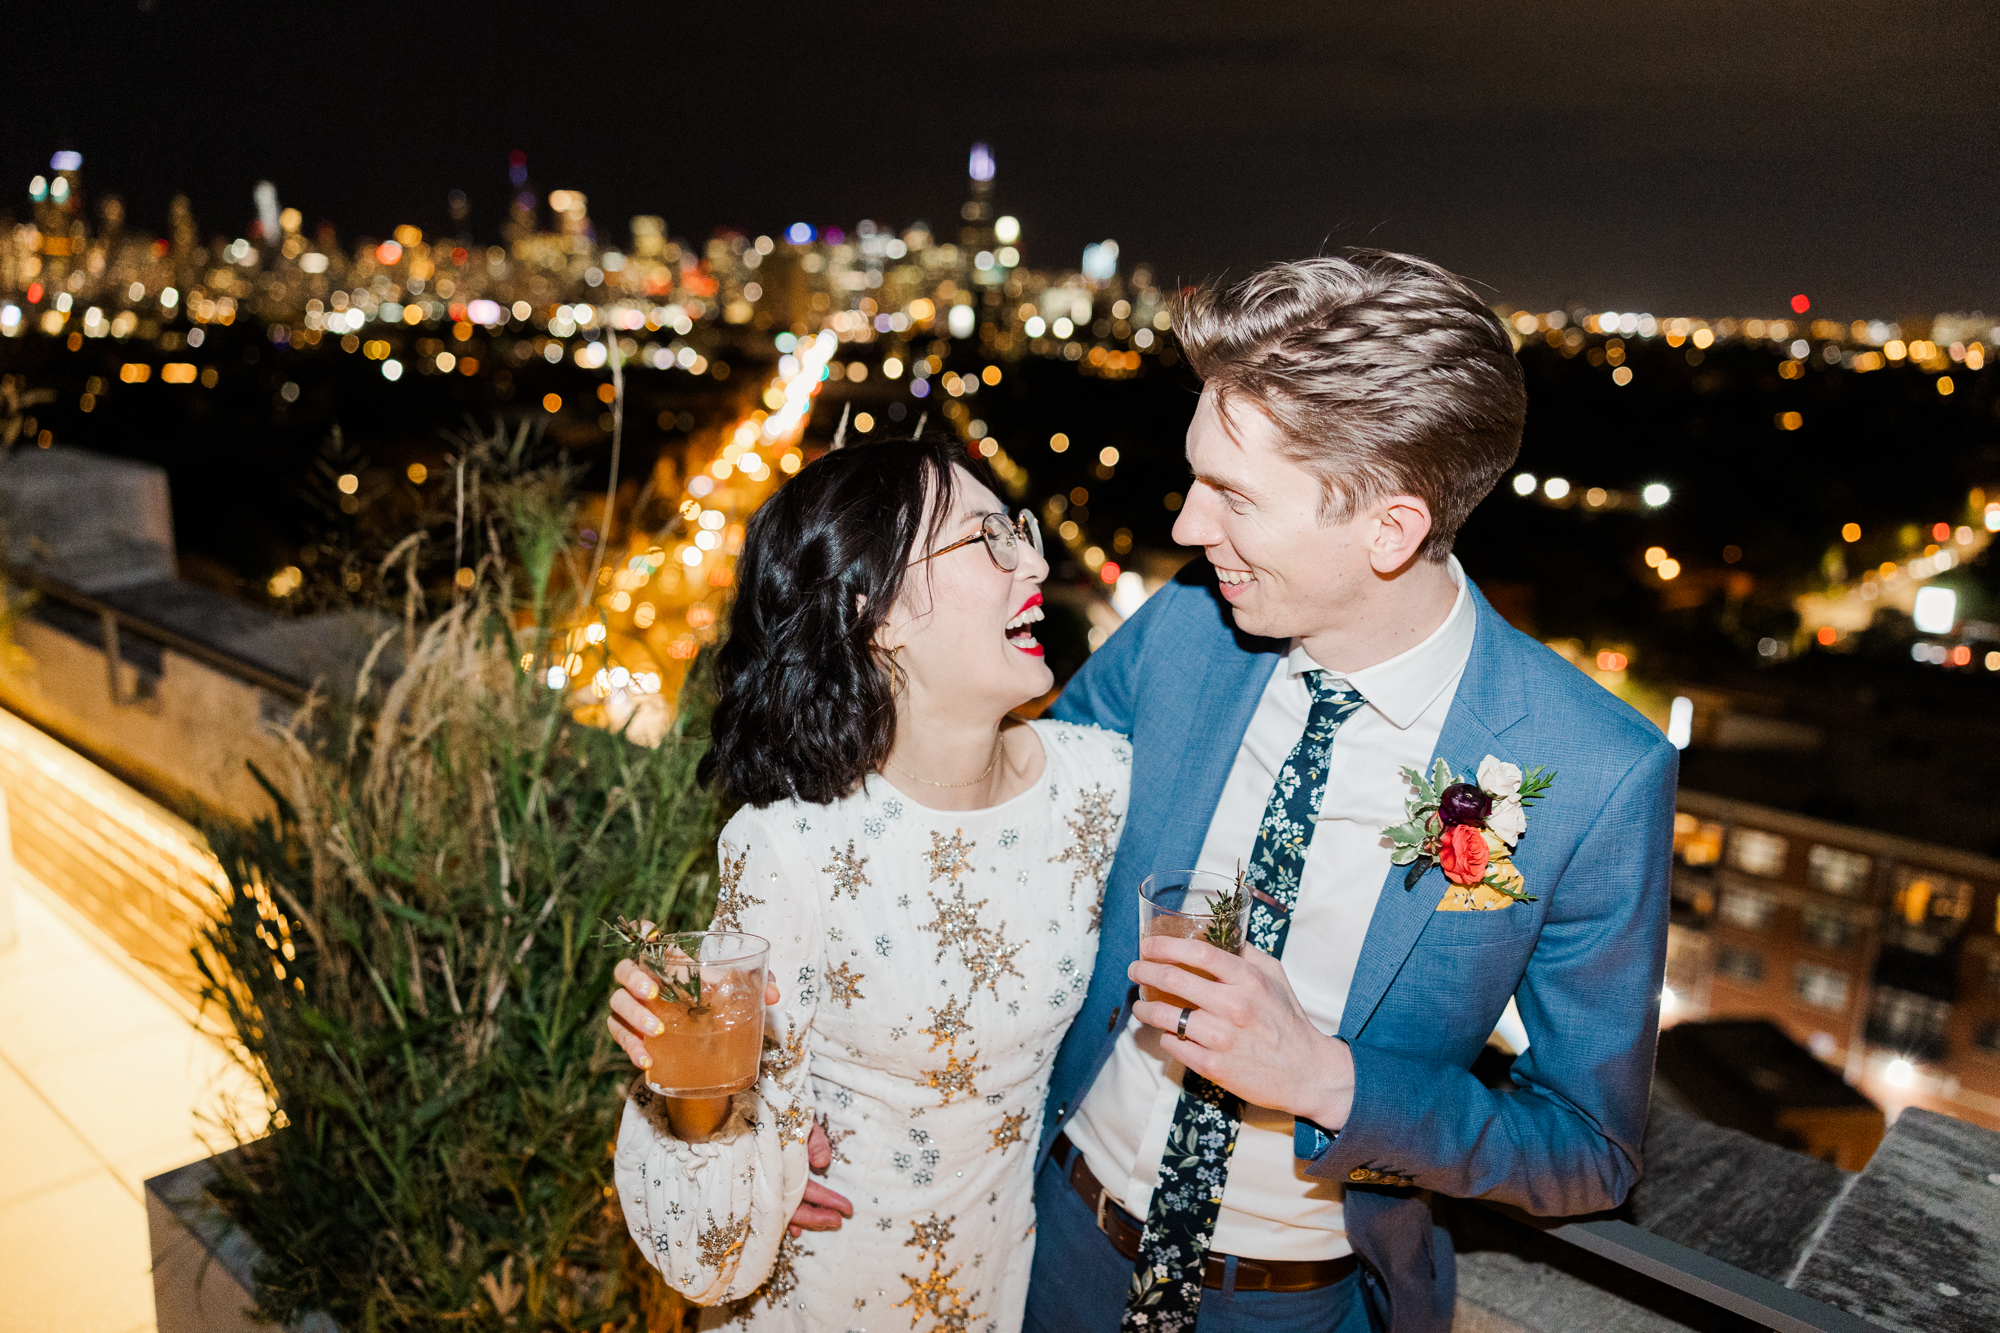 Picturesque Chicago Micro Wedding Photos at Wicker Park Inn in Fall